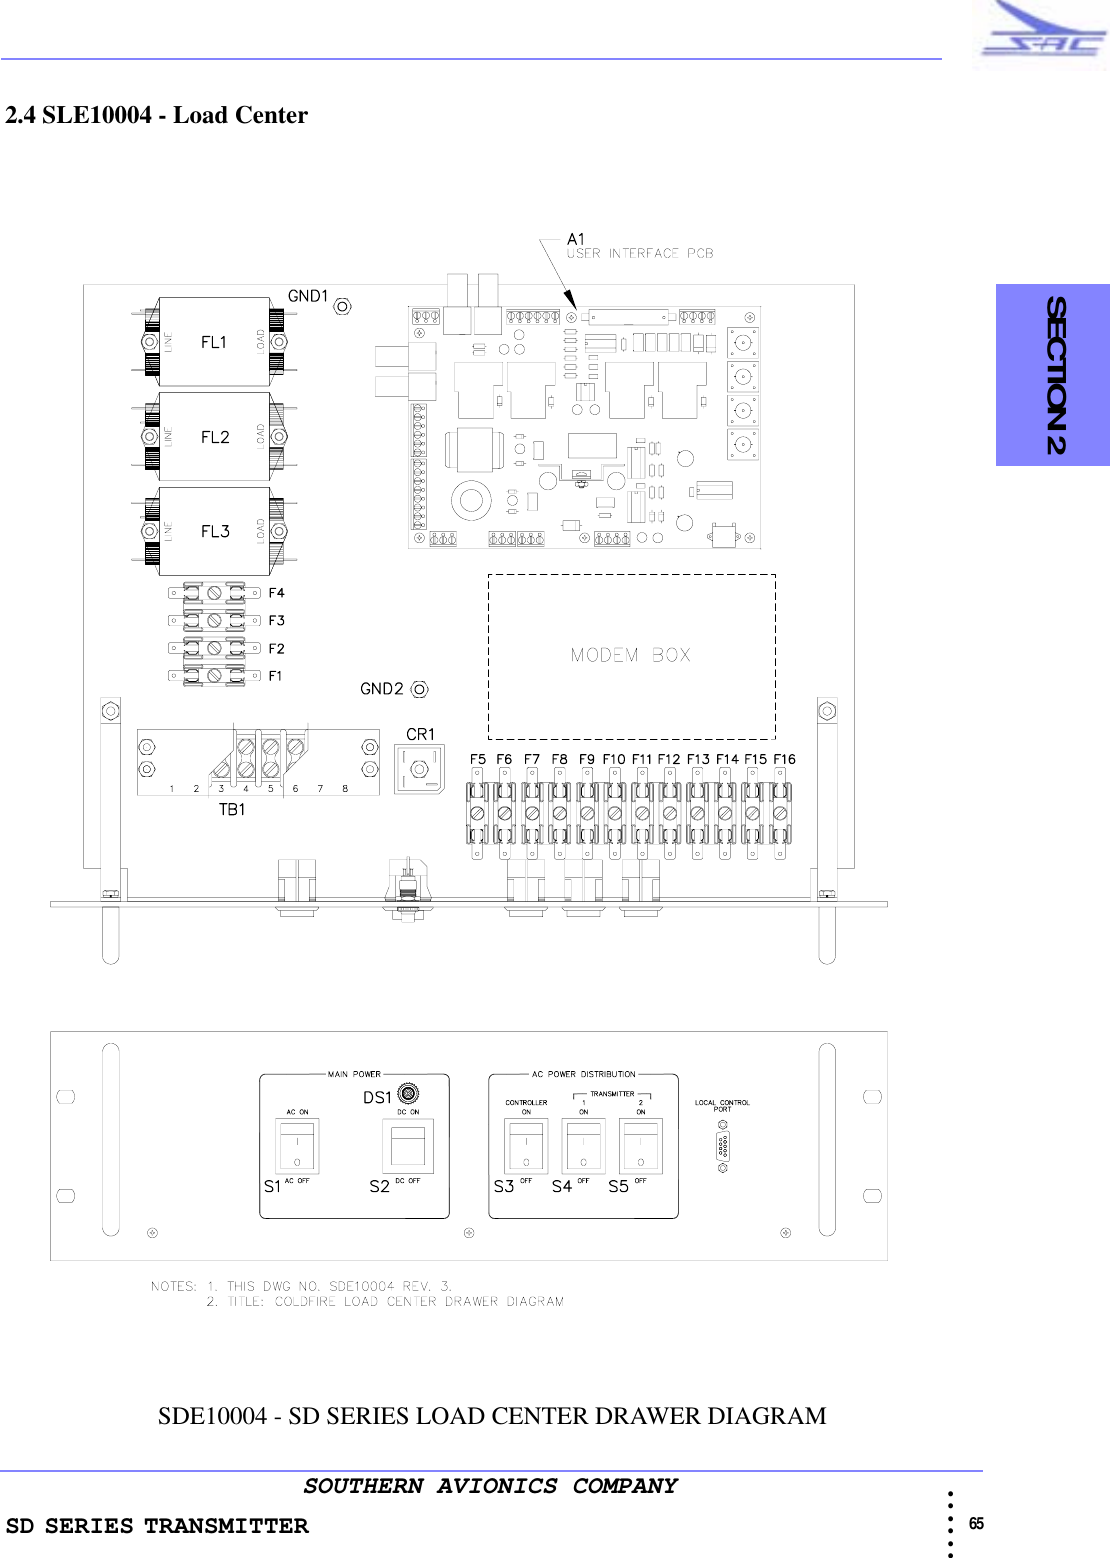 SD SERIES TRANSMITTER                                                                                                                                                                                                65 • • • •••SOUTHERN AVIONICS COMPANY  SECTION 22.4 SLE10004 - Load CenterSDE10004 - SD SERIES LOAD CENTER DRAWER DIAGRAM